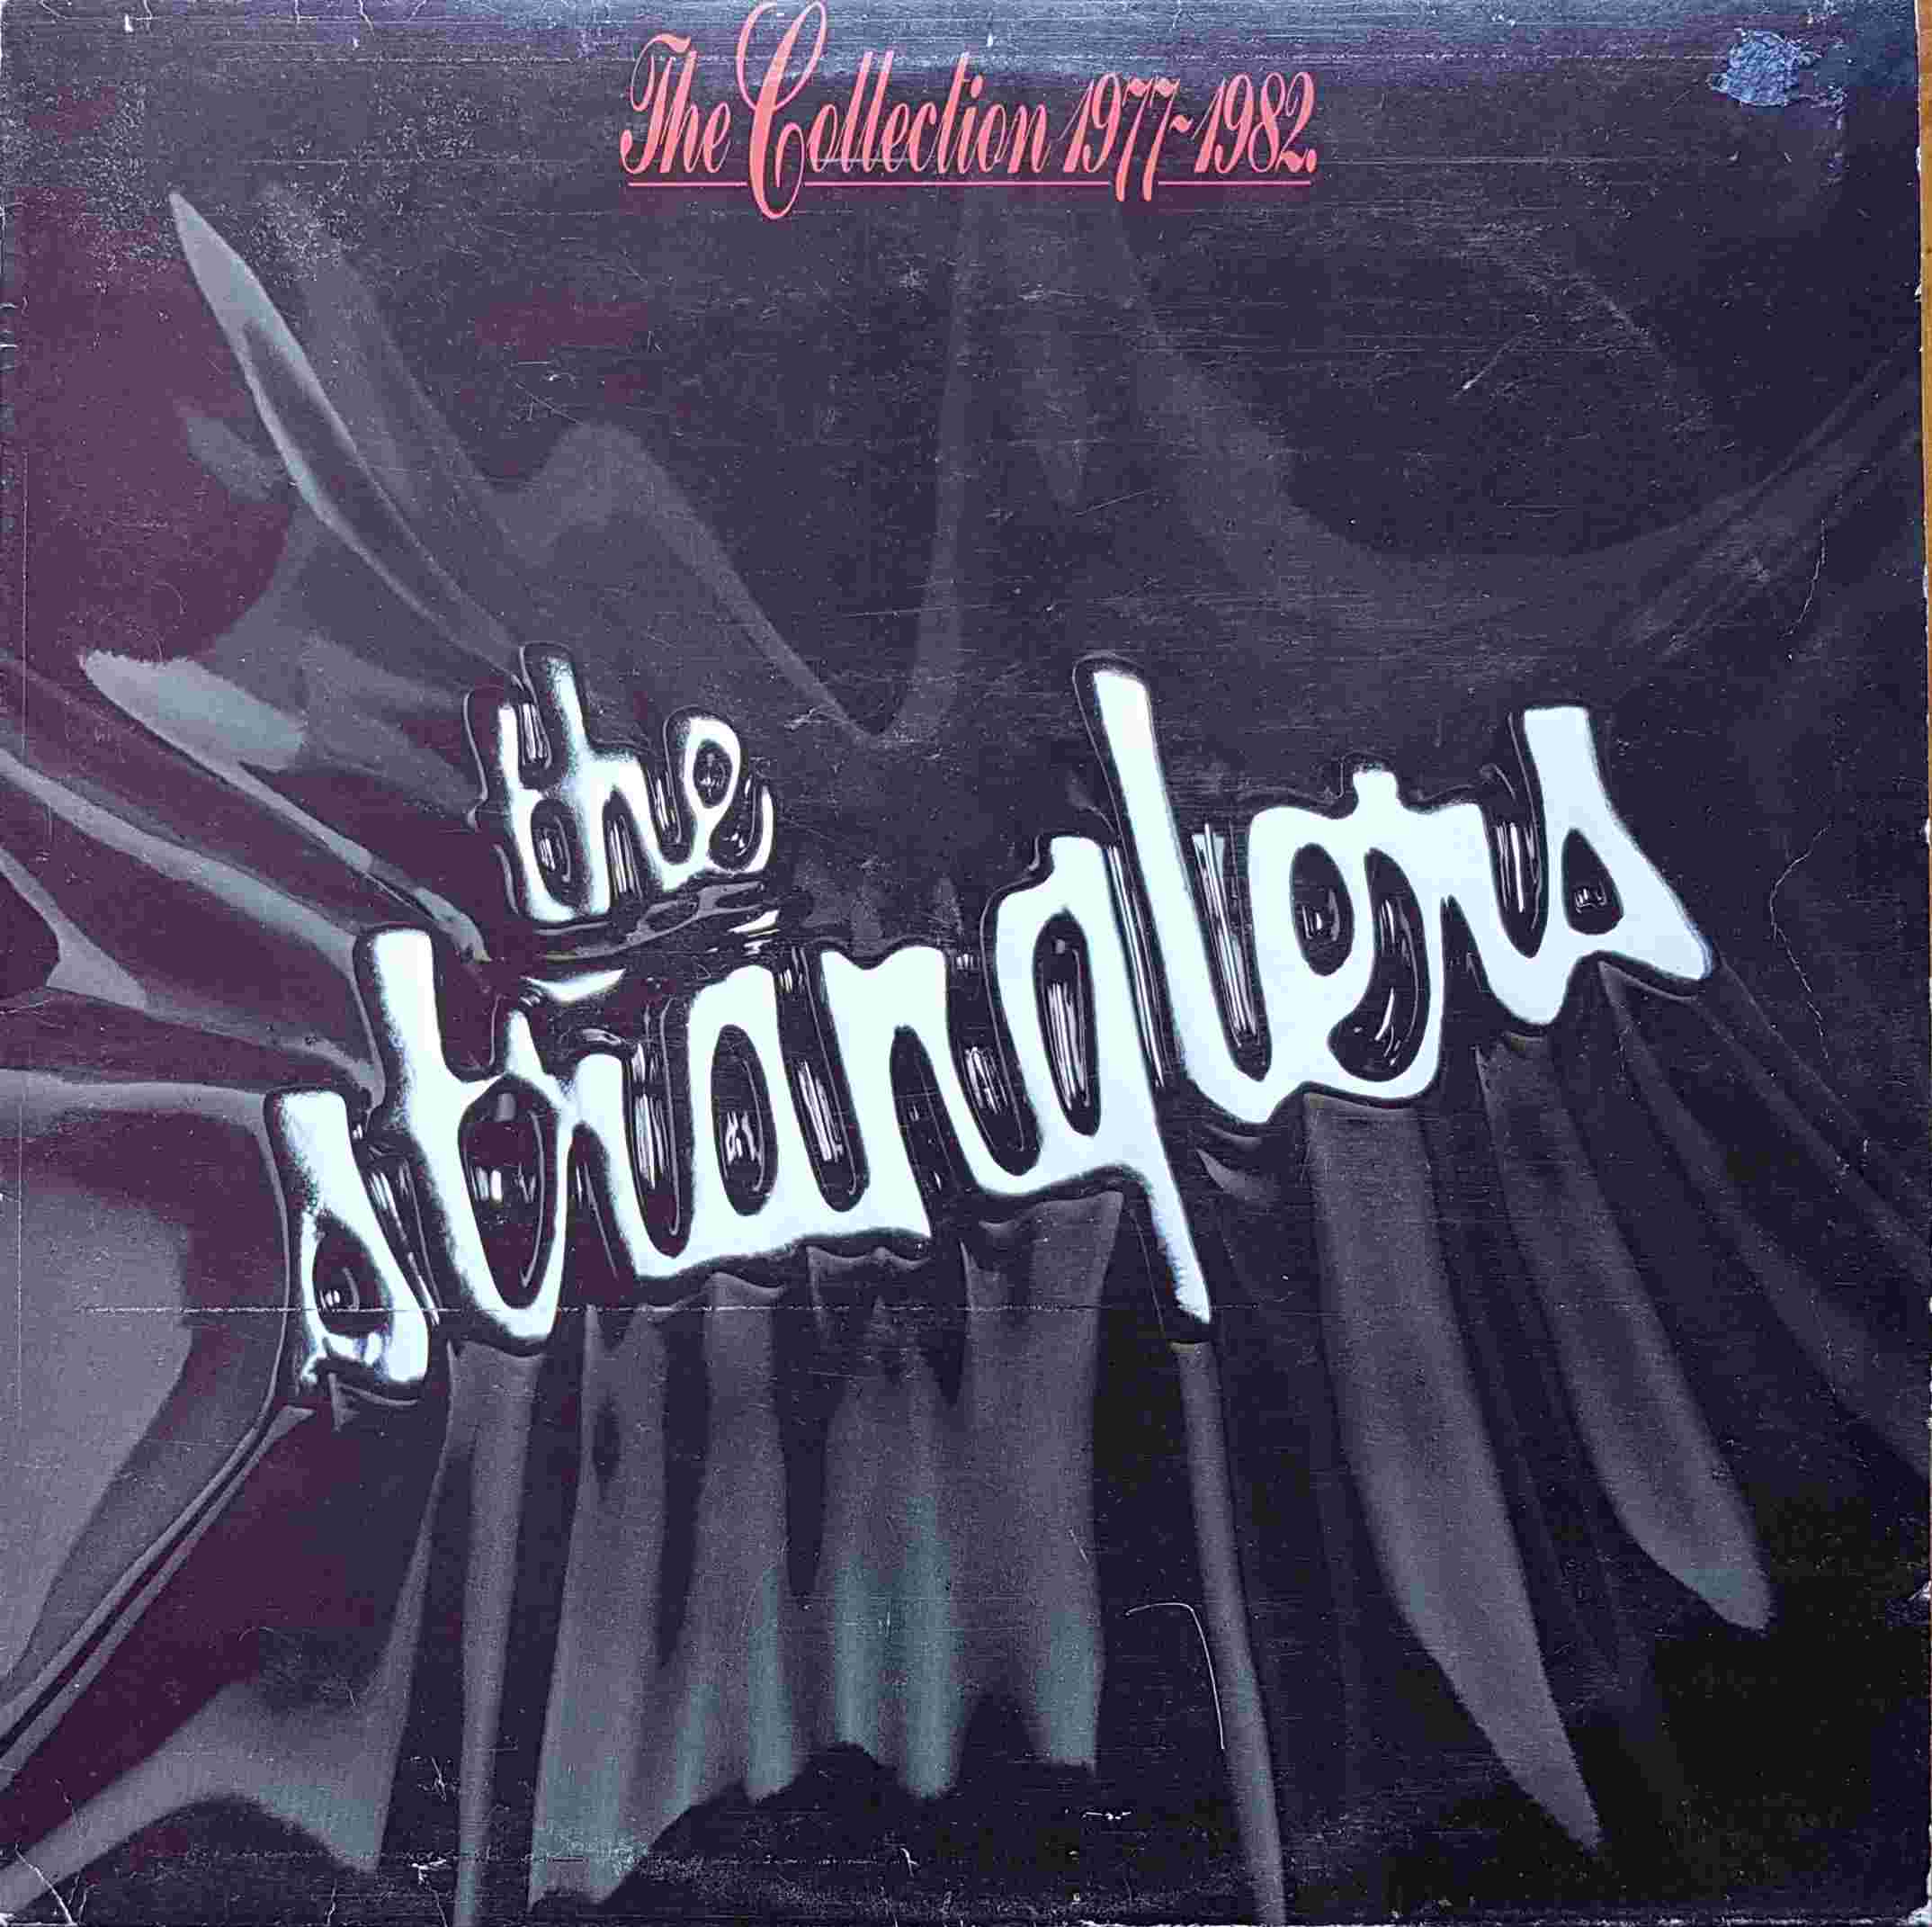 Picture of 14C 062 - 83327 The collection 1977 - 1982 by artist The Stranglers 